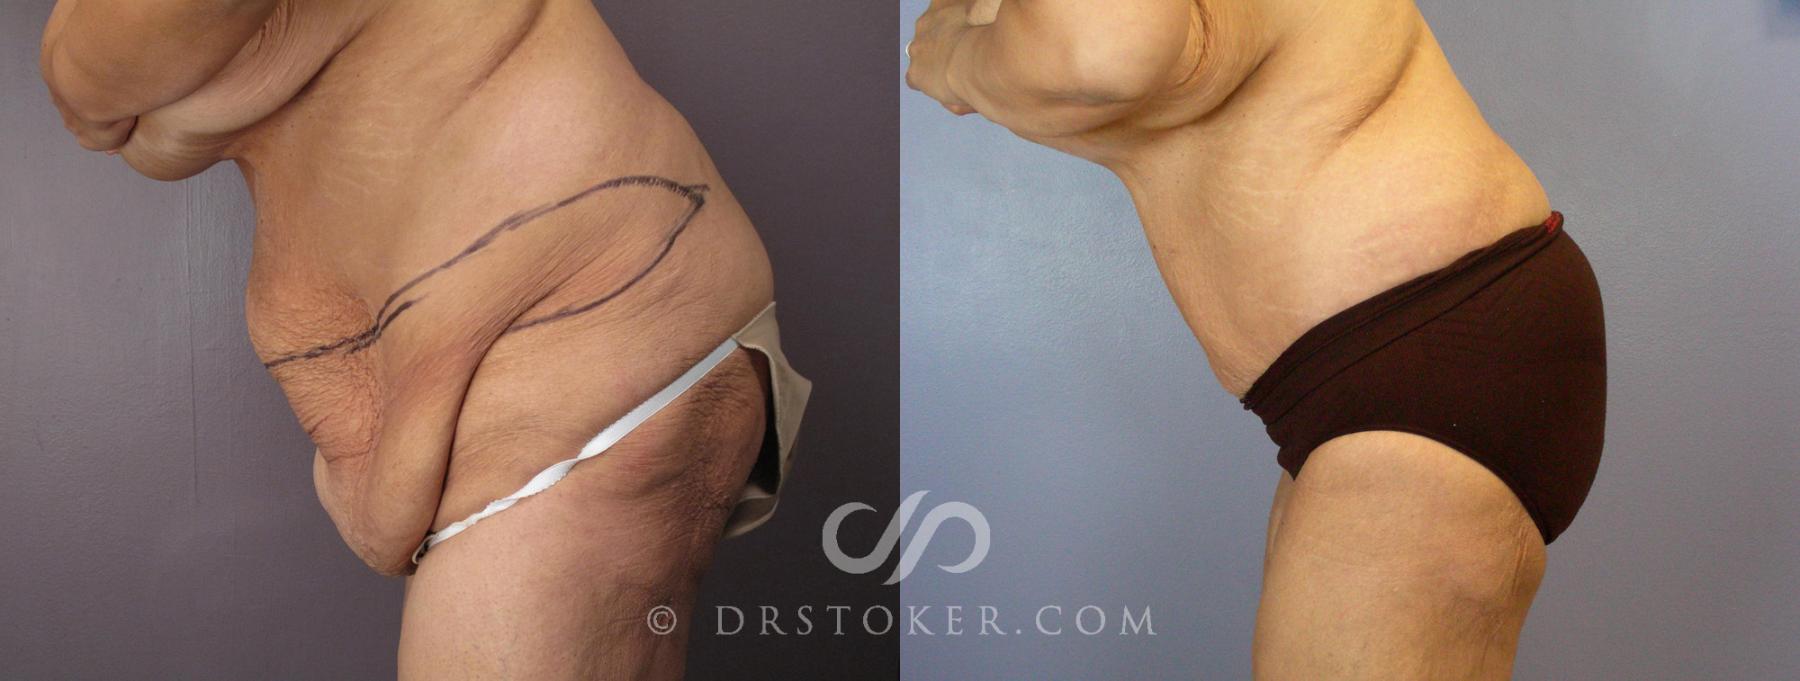 Tummy Tuck Before and After Pictures Case 119